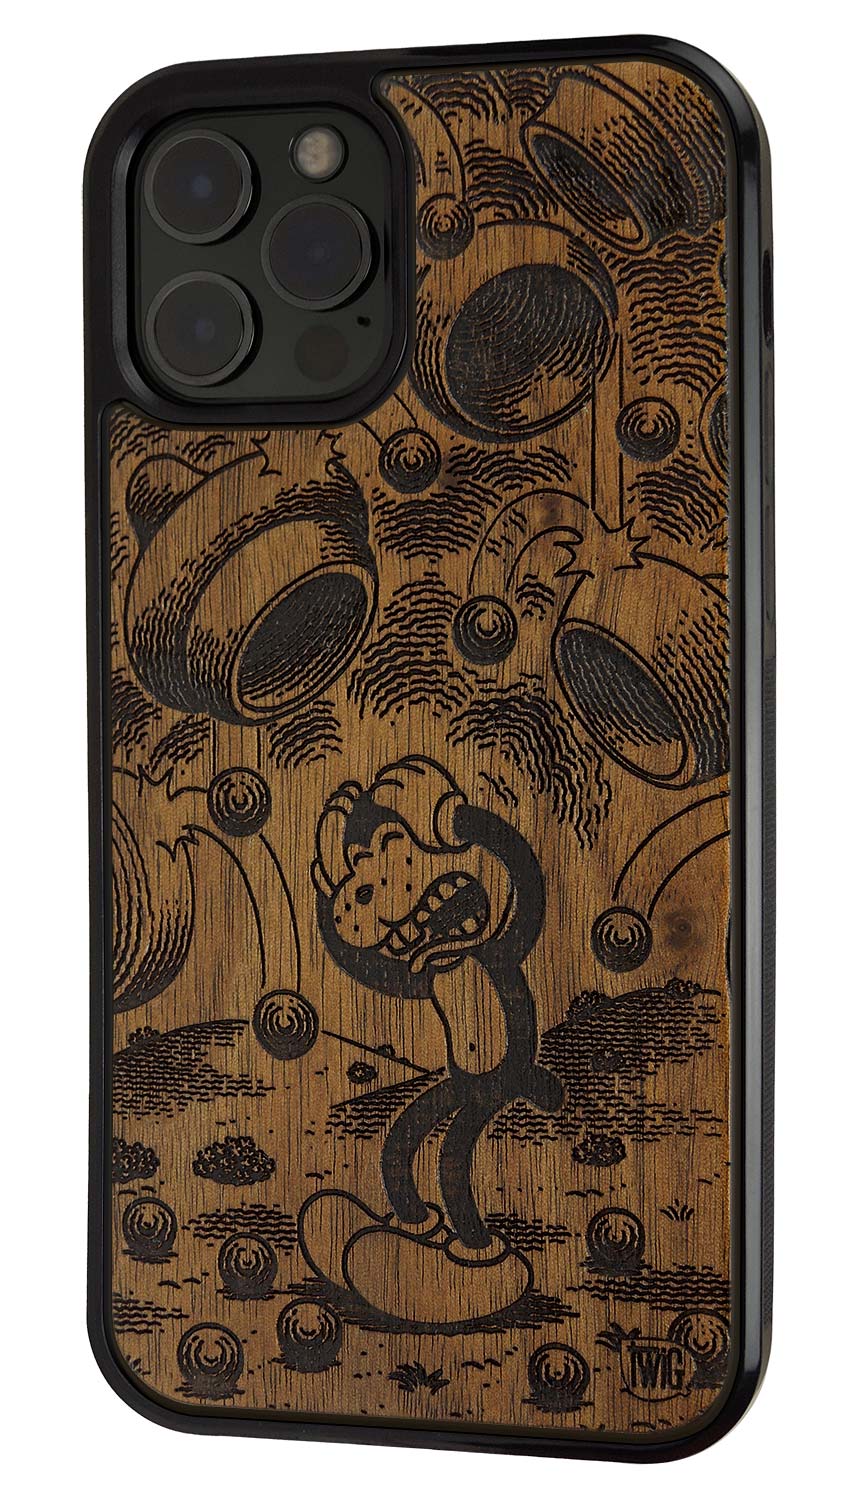 Loud Day - Walnut iPhone Case, iPhone Case - Twig Case Co.